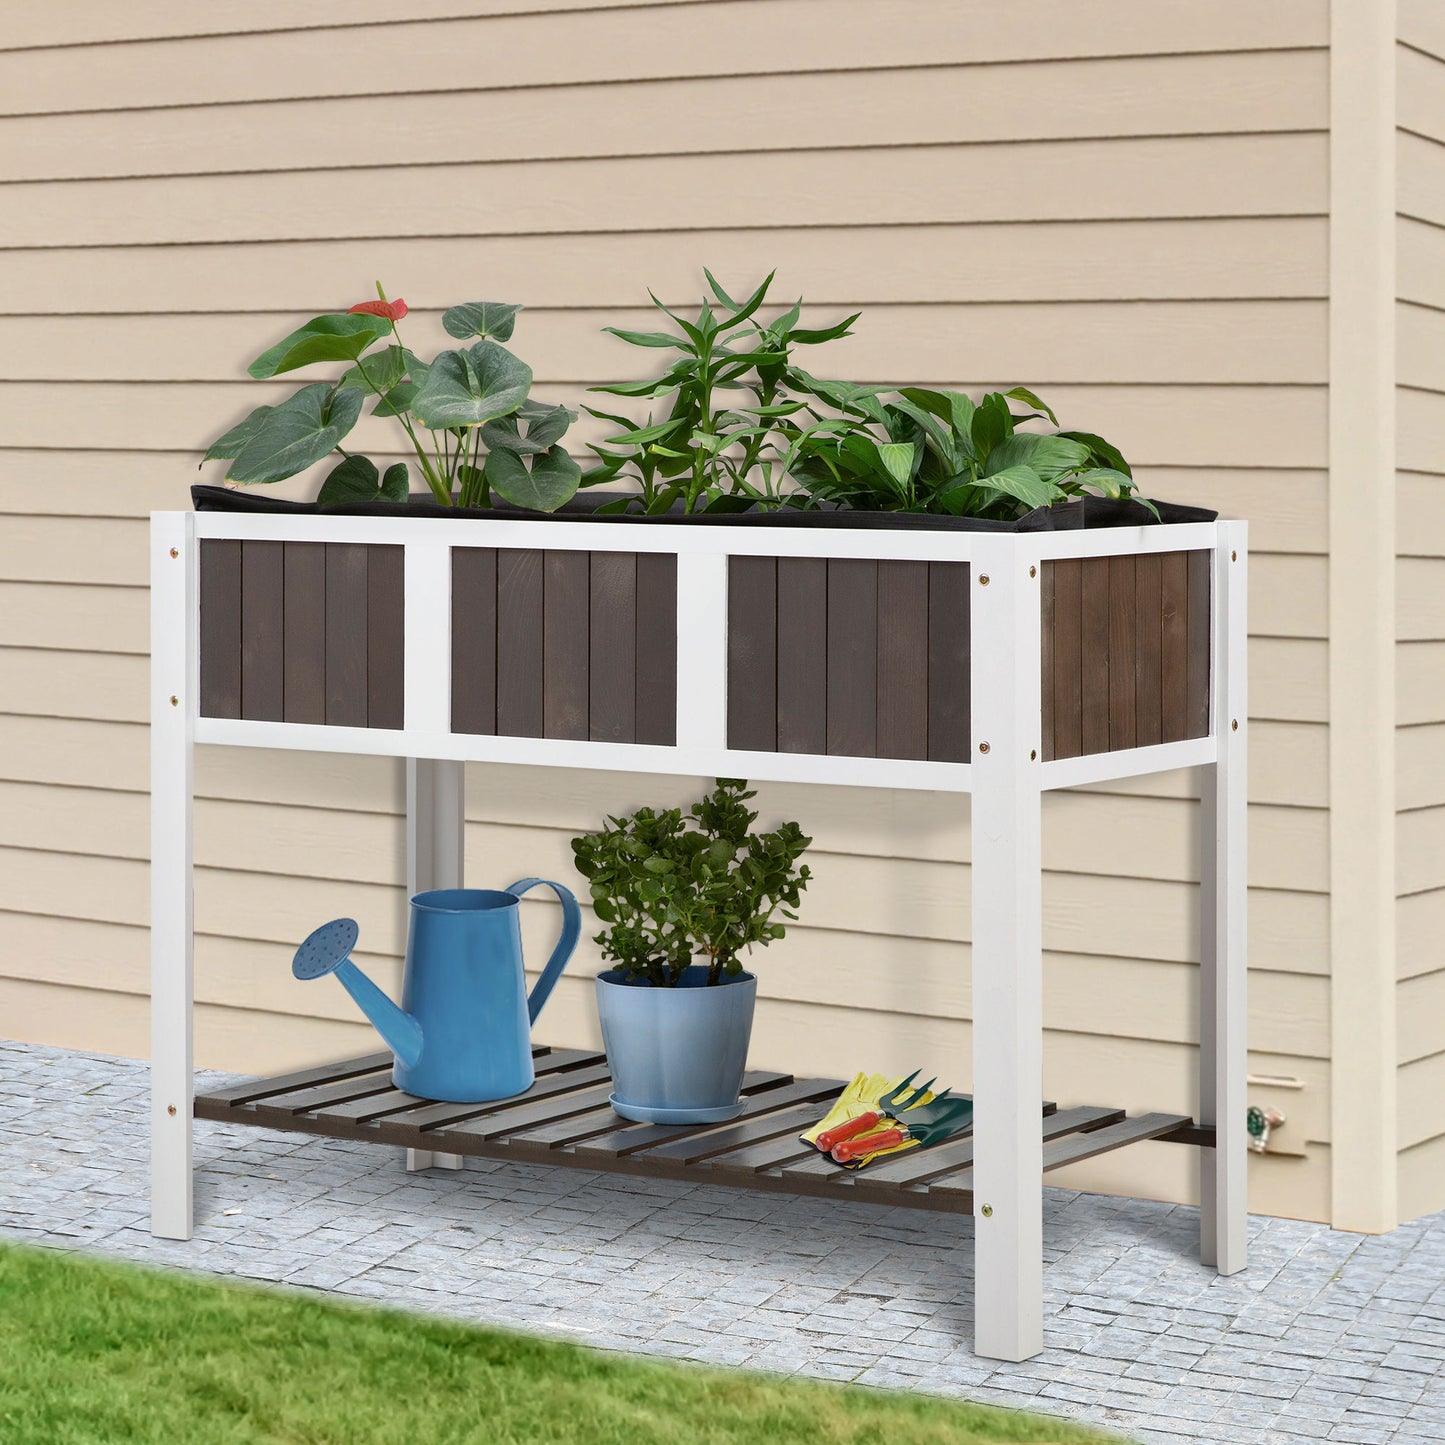 Outsunny Wooden Planter Raised Elevated Garden Bed with Shelf Solid Wood Outdoor/Indoor